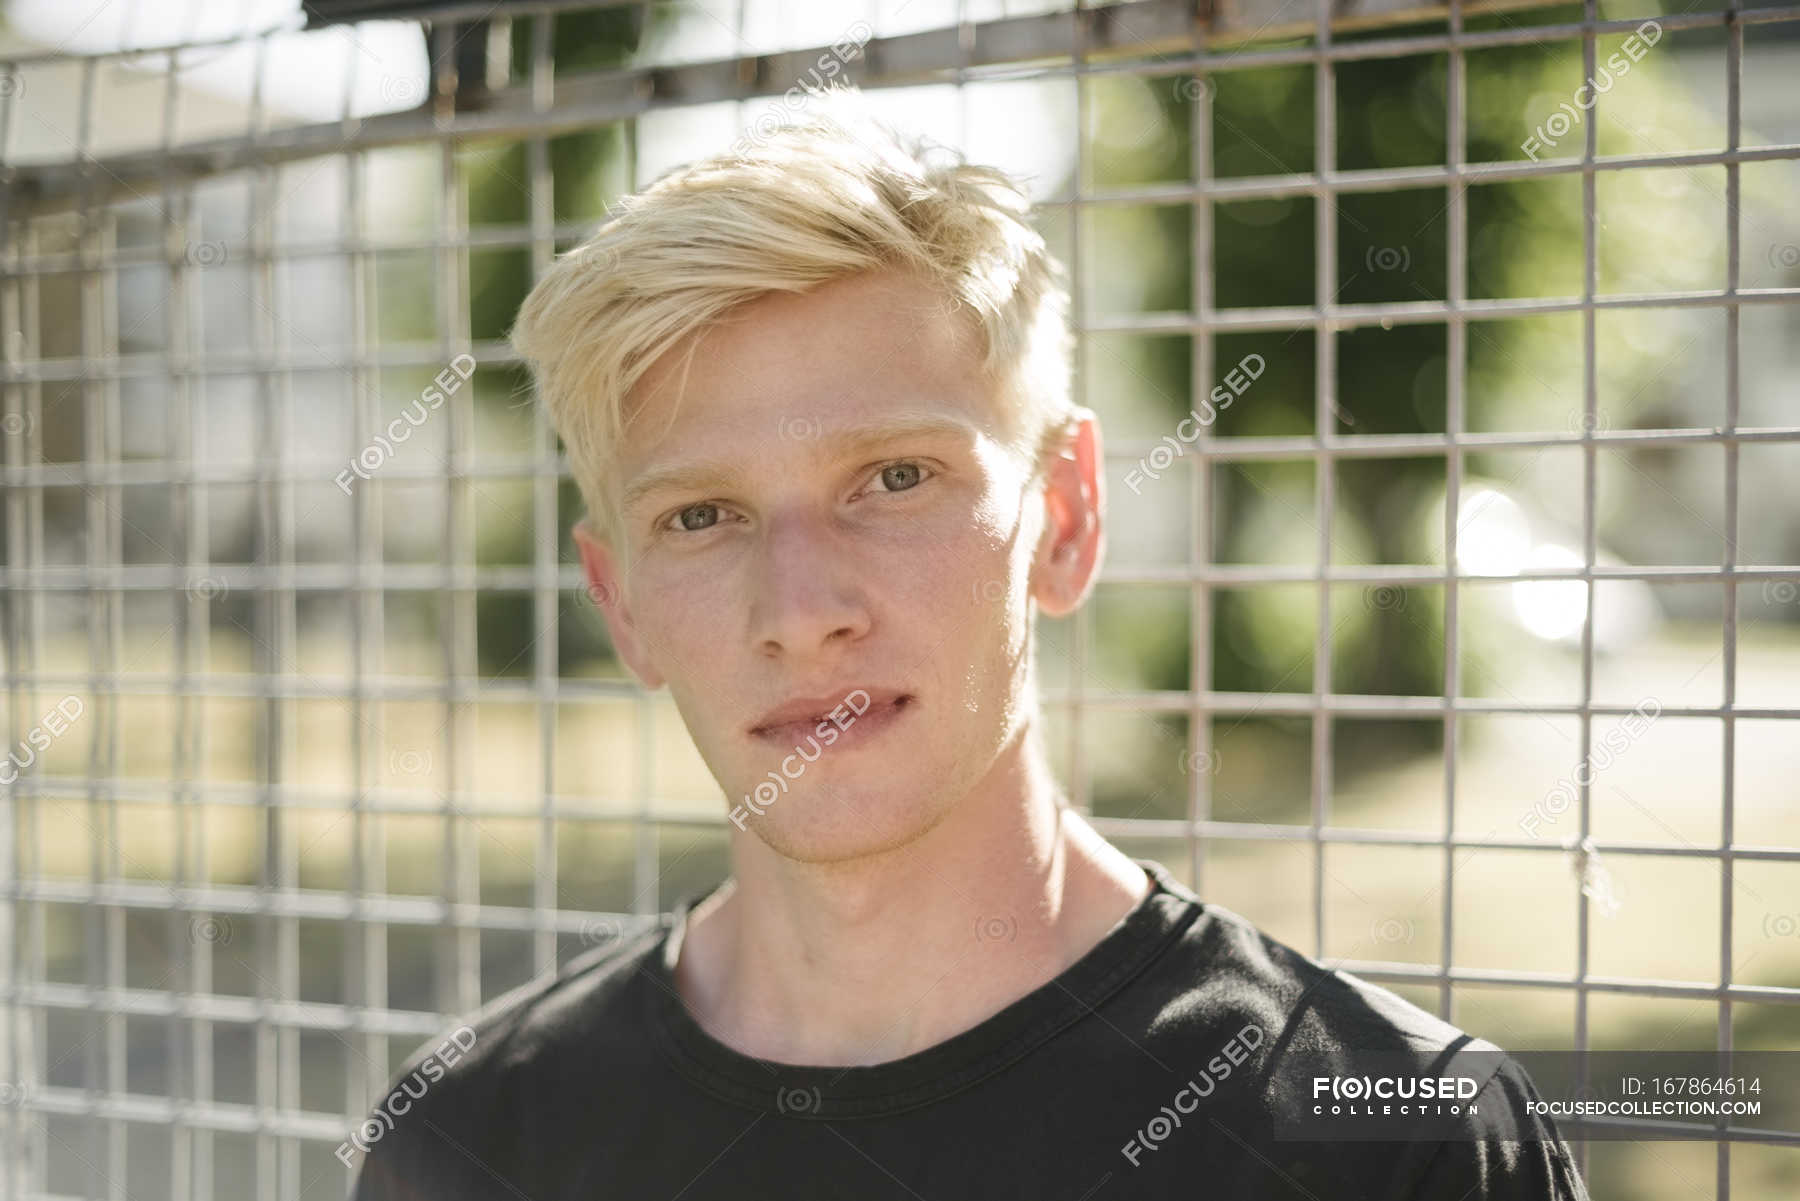 Portrait Of Blond Haired Young Man By Wire Fence Looking At